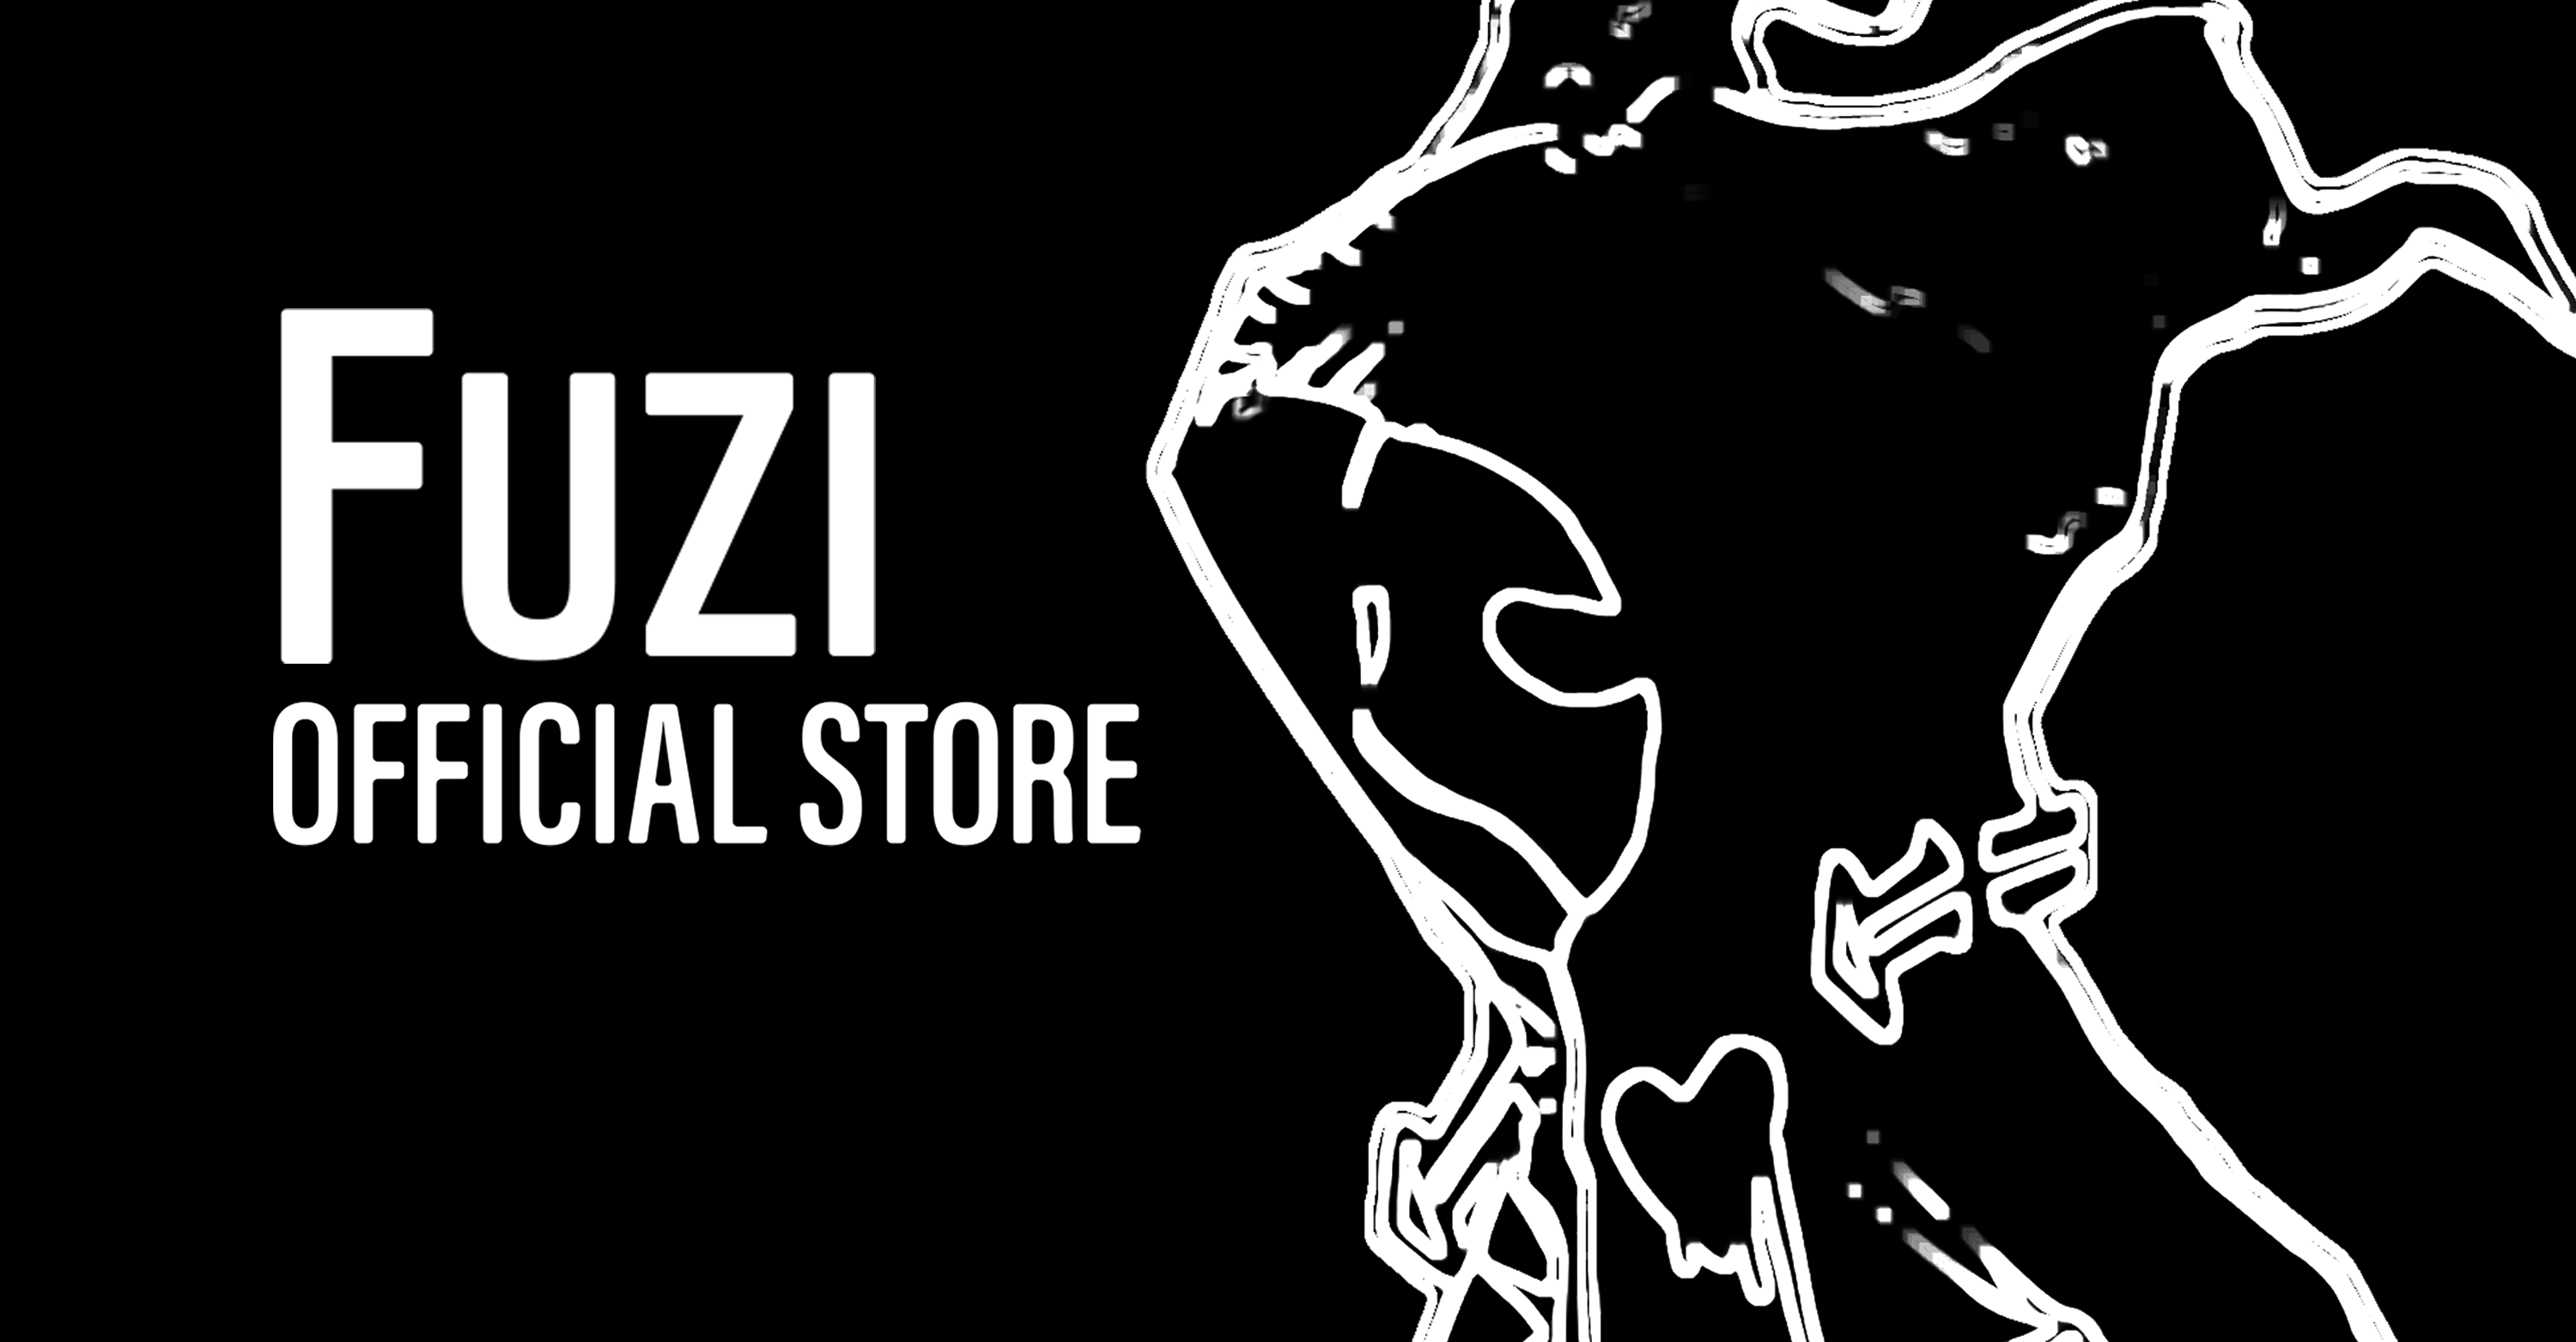 FUZI OFFICIAL STORE